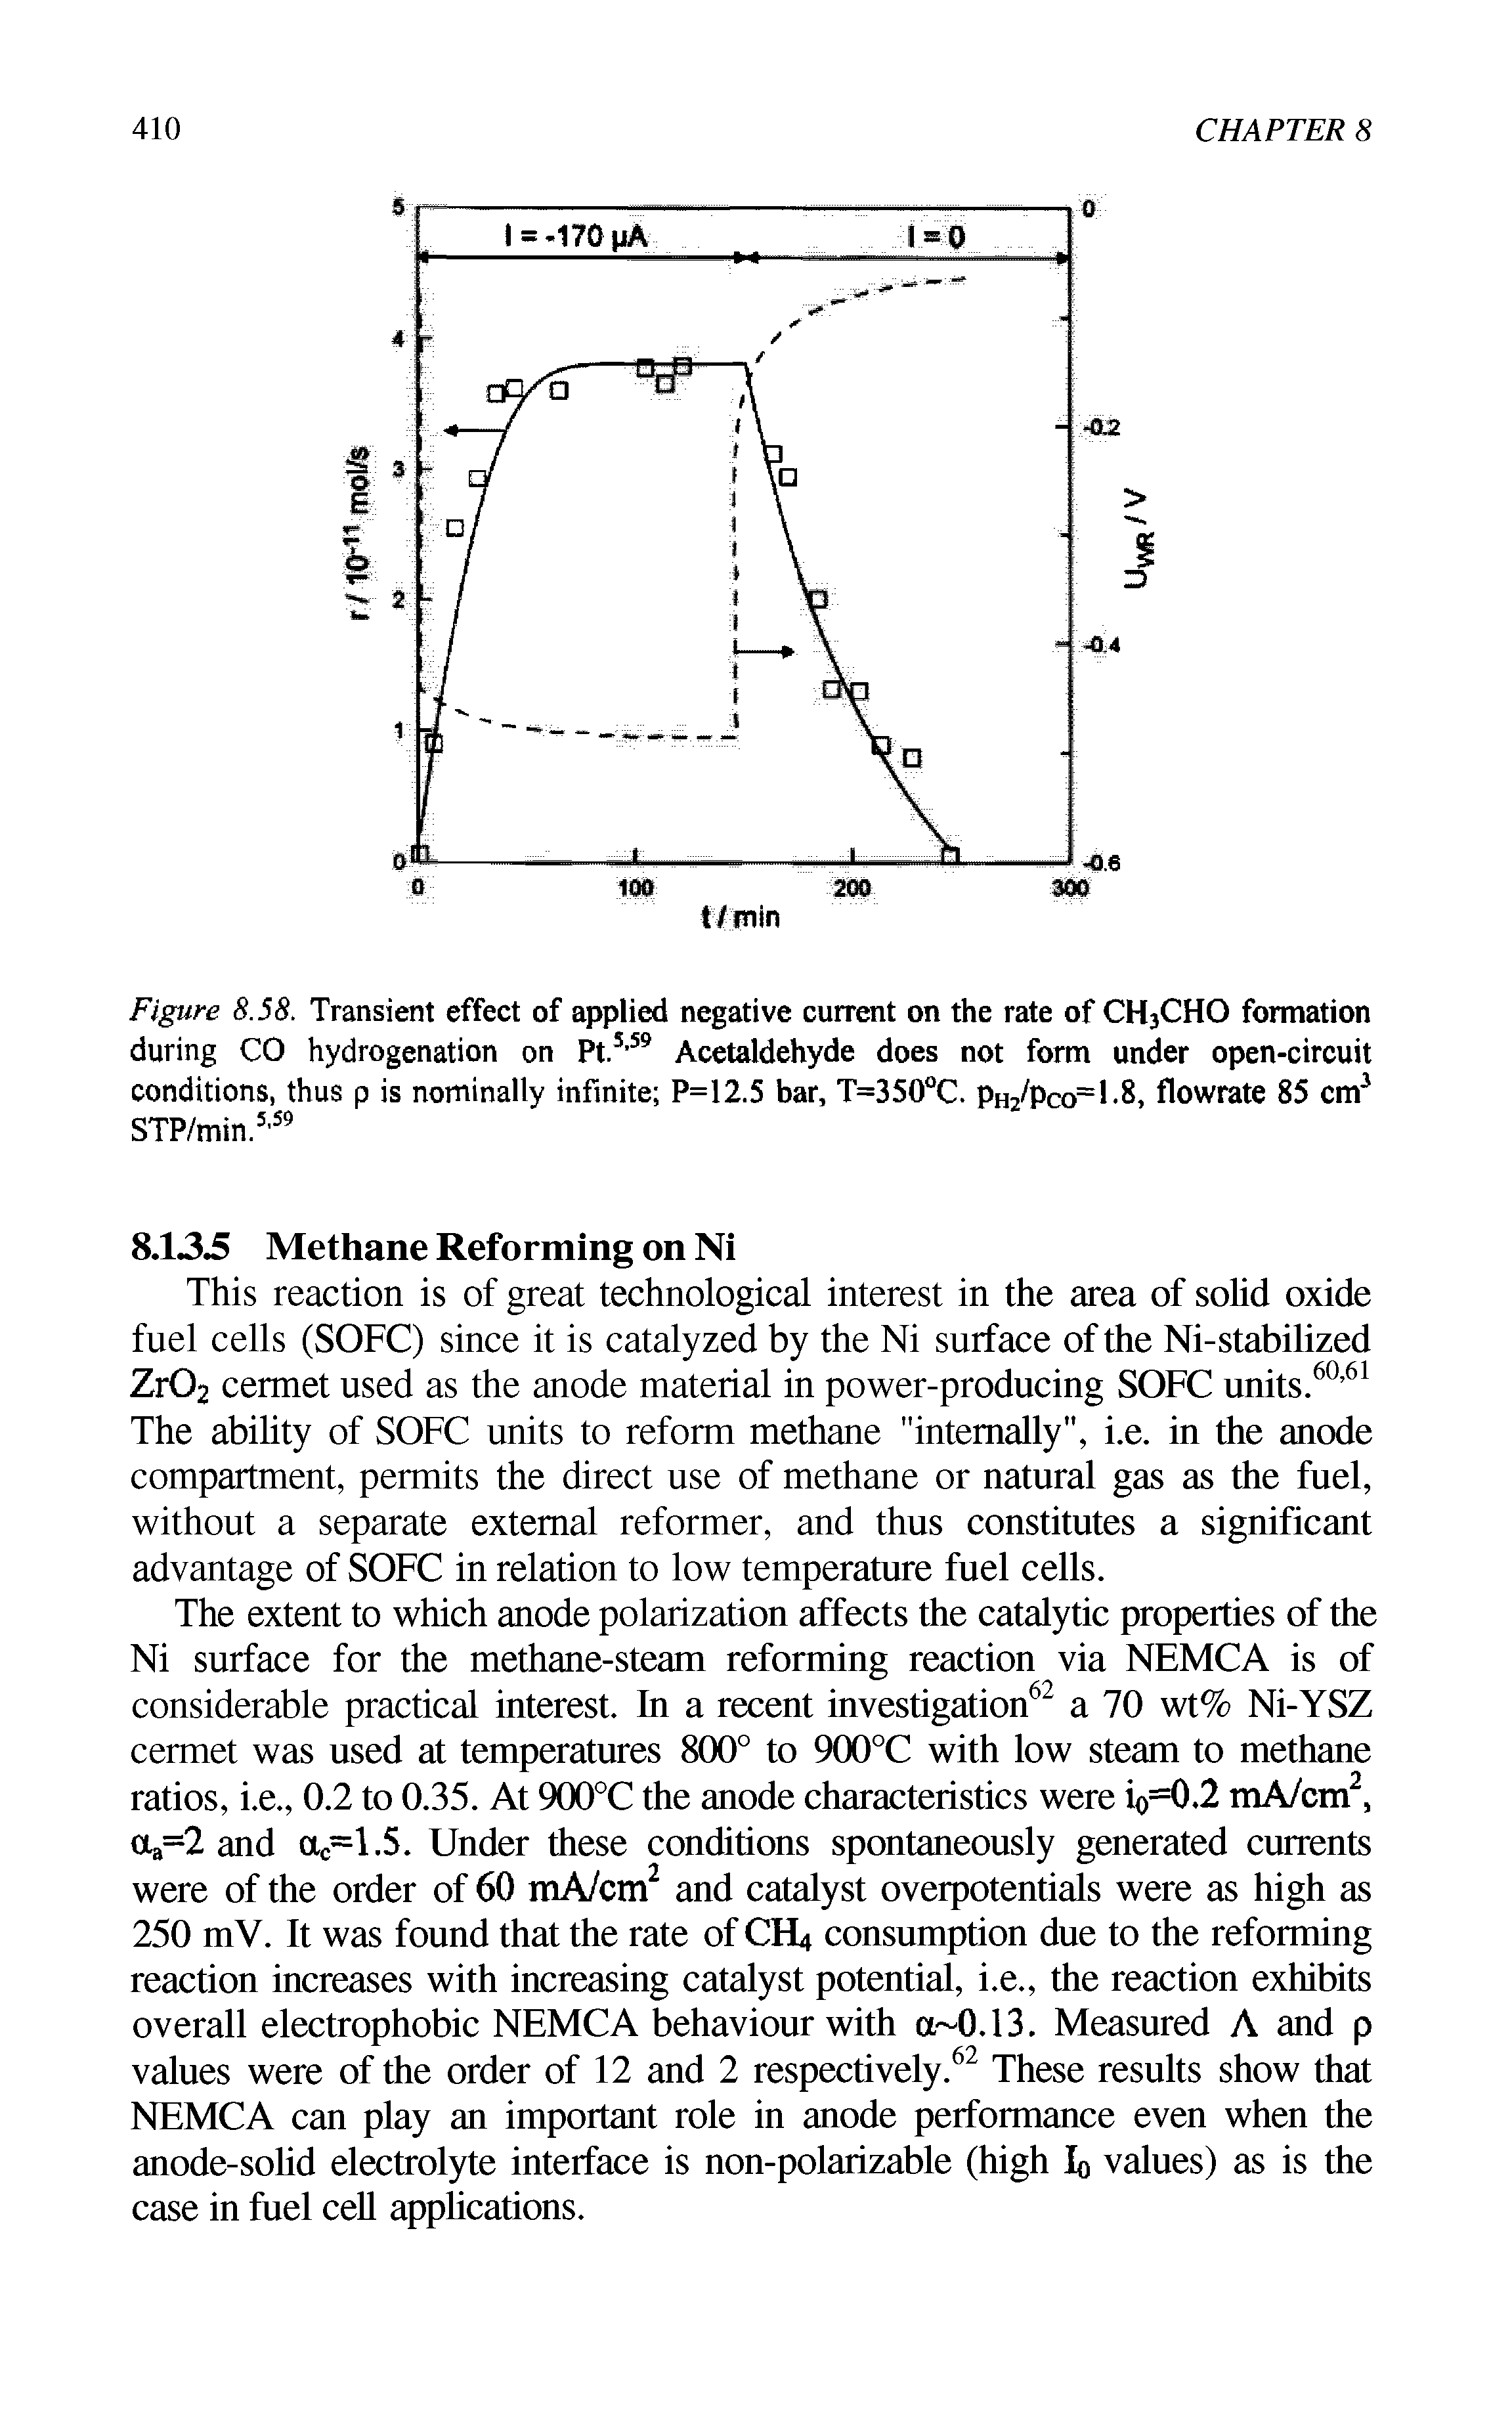 Figure 8.58. Transient effect of applied negative current on the rate of CH3CHO formation during CO hydrogenation on Pt.5,59 Acetaldehyde does not form under open-circuit conditions, thus p is nominally infinite P=12.5 bar, T=350°C. pH2/pco=l-8, flowrate 85 cm3 STP/min.5,59...